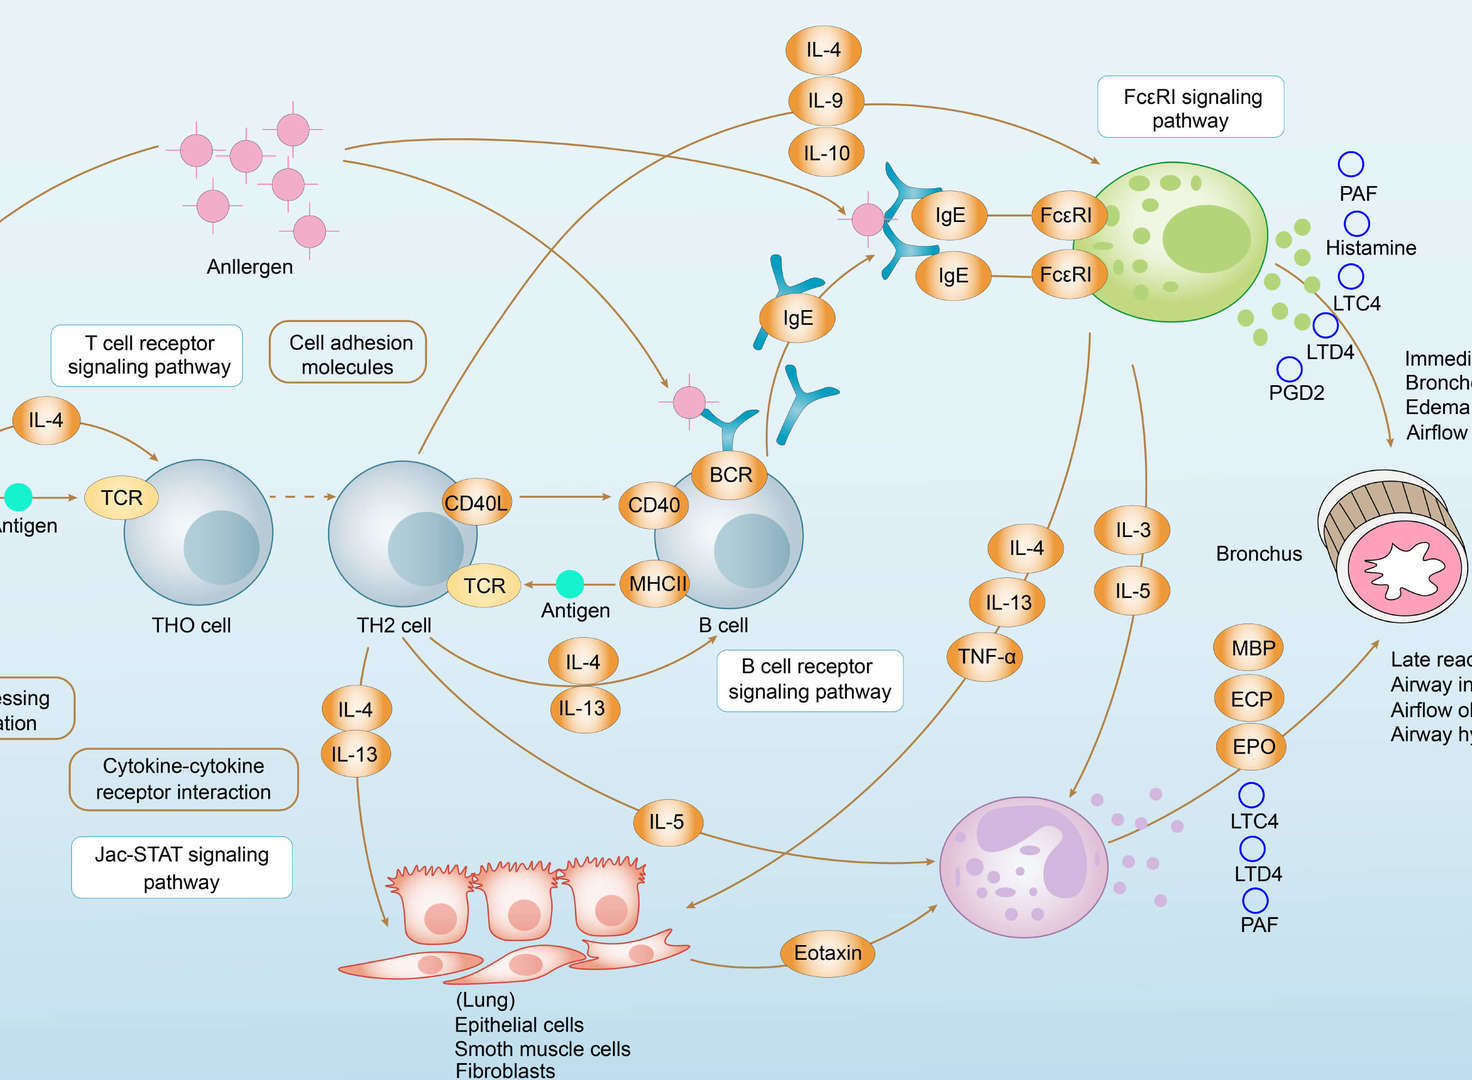 Asthma Overview - Pathways, Diagnosis, Targeted Therapies